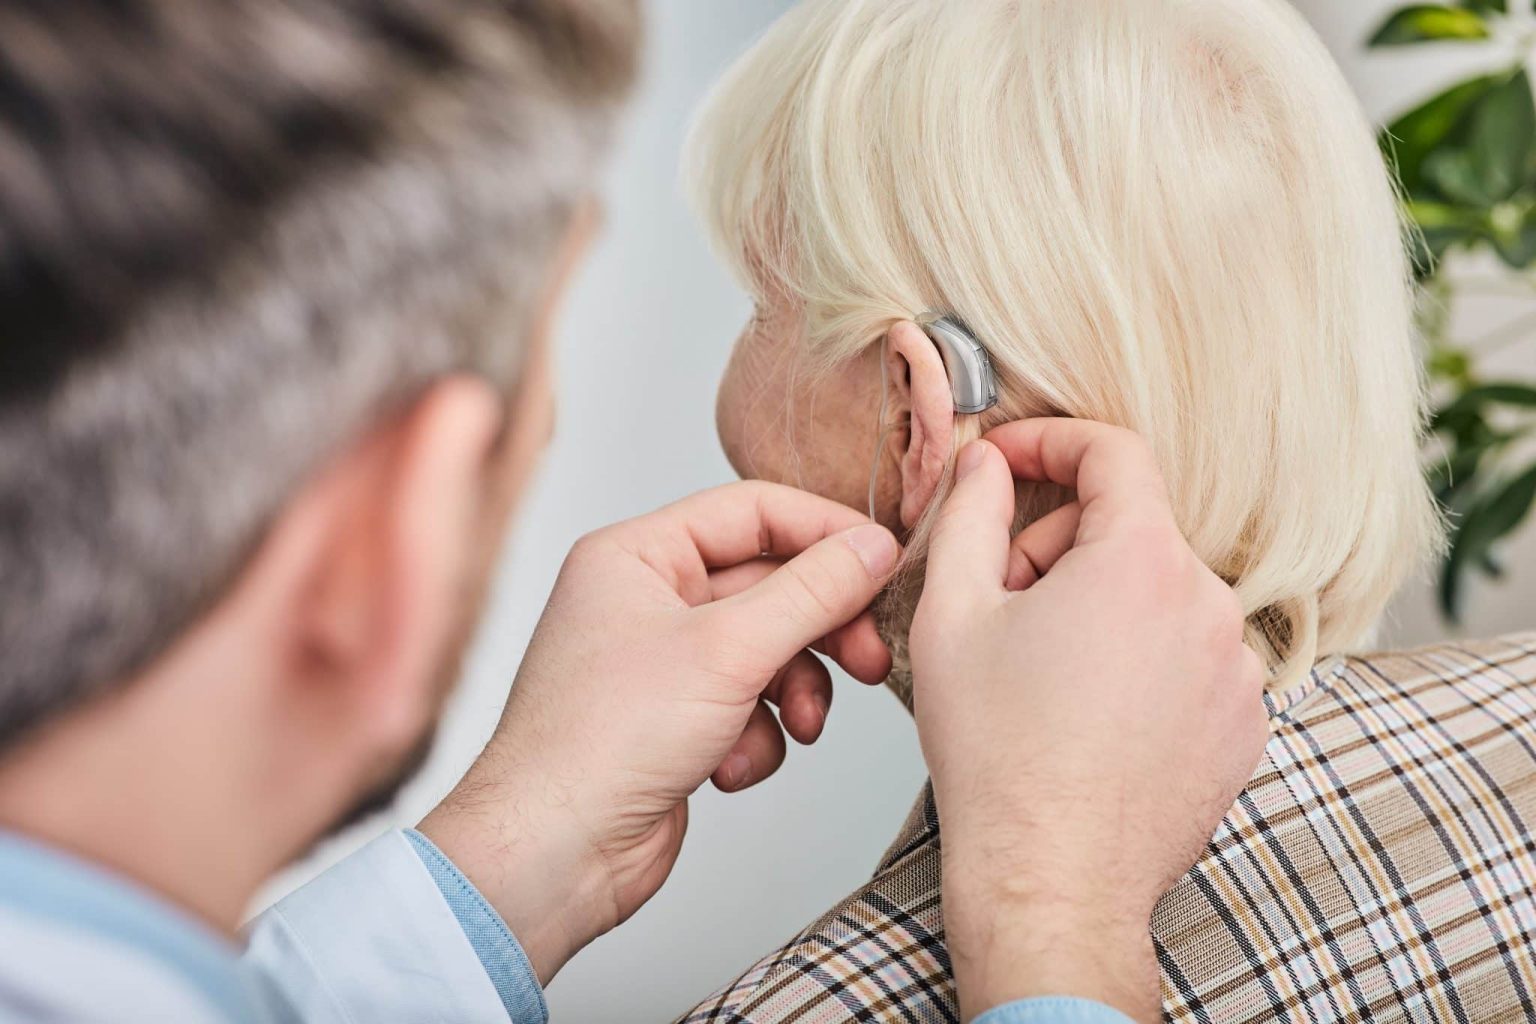 Woman getting fitted for a hearing aid by hear audiologist.